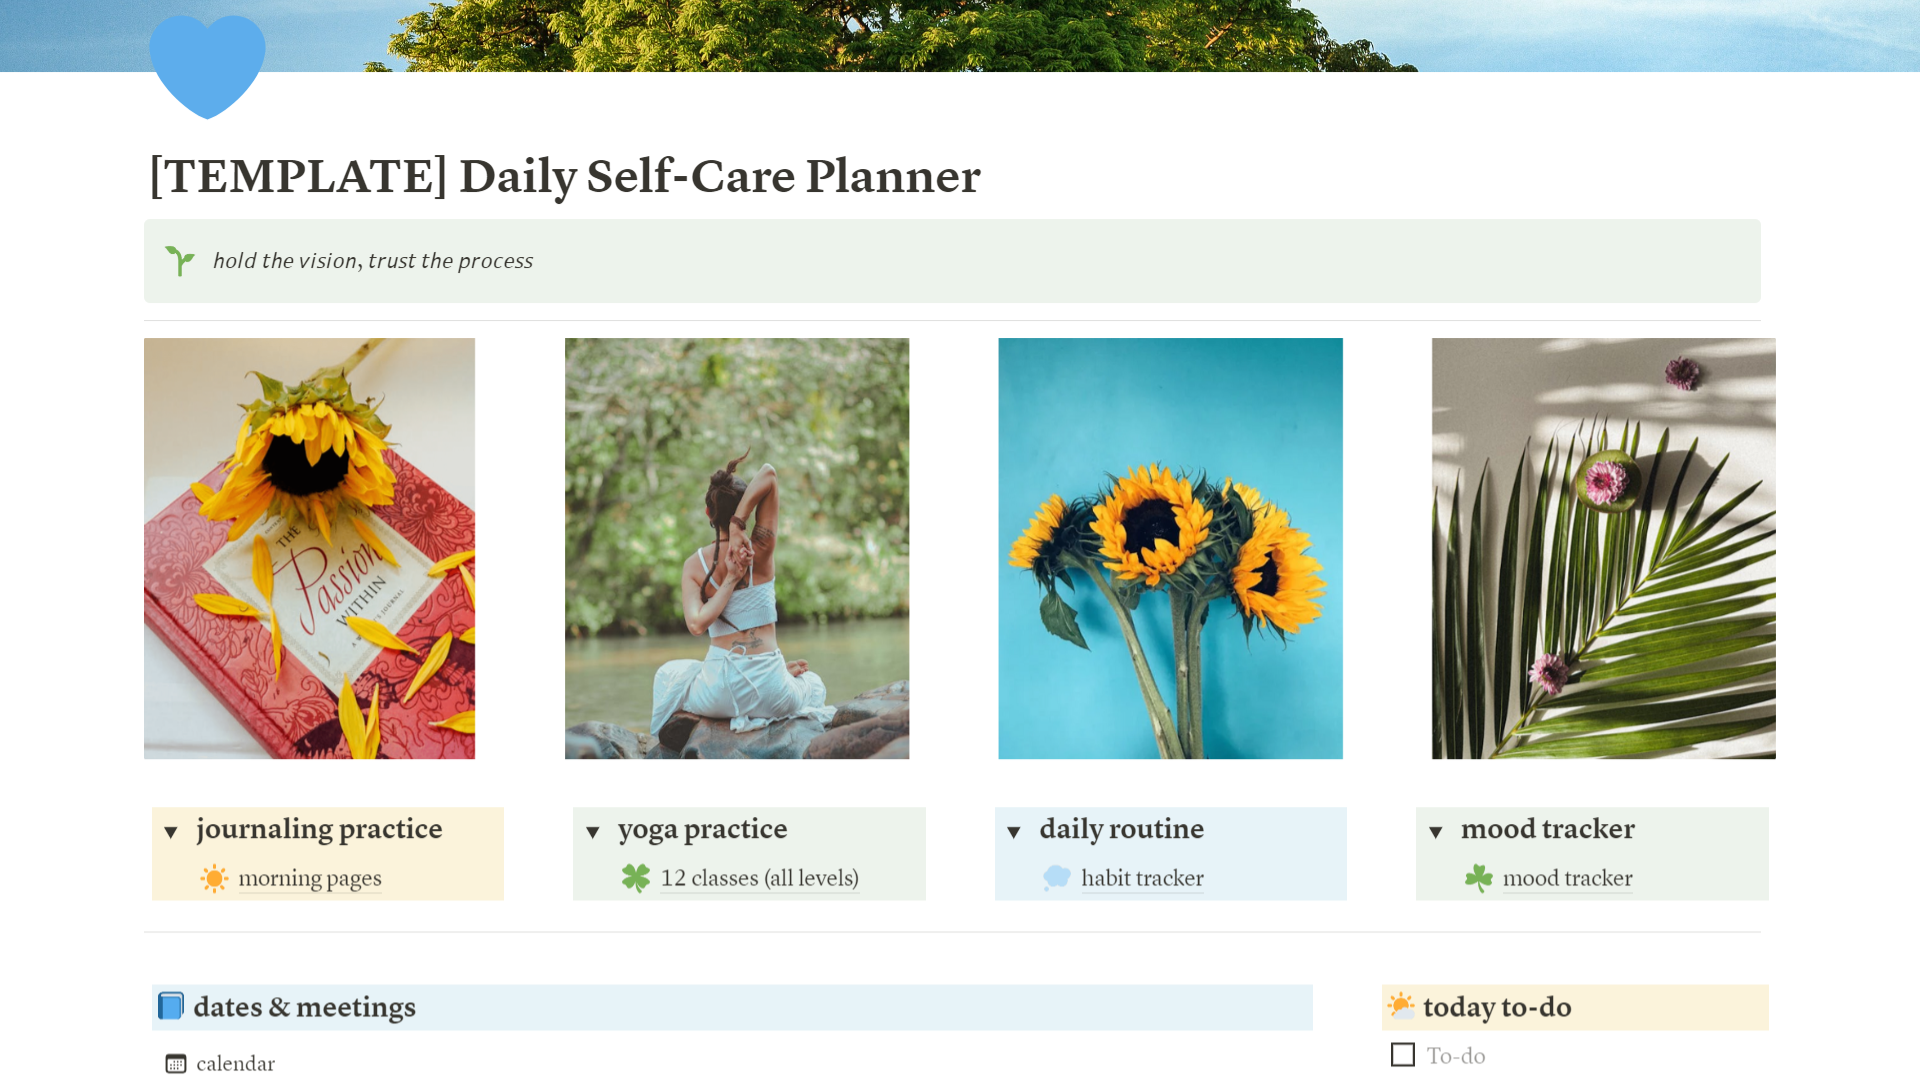 💚 This Daily Planner will help you transform your daily routine into a self-care ritual.
✅ Journaling practice + Tutorial
✅ 12 Yoga Flow Classes Plan
✅ Habit Tracker + Tutorial
✅ Mood Tracker + Tutorial
Self-care is how you give yourself permission to evolve into your best self!